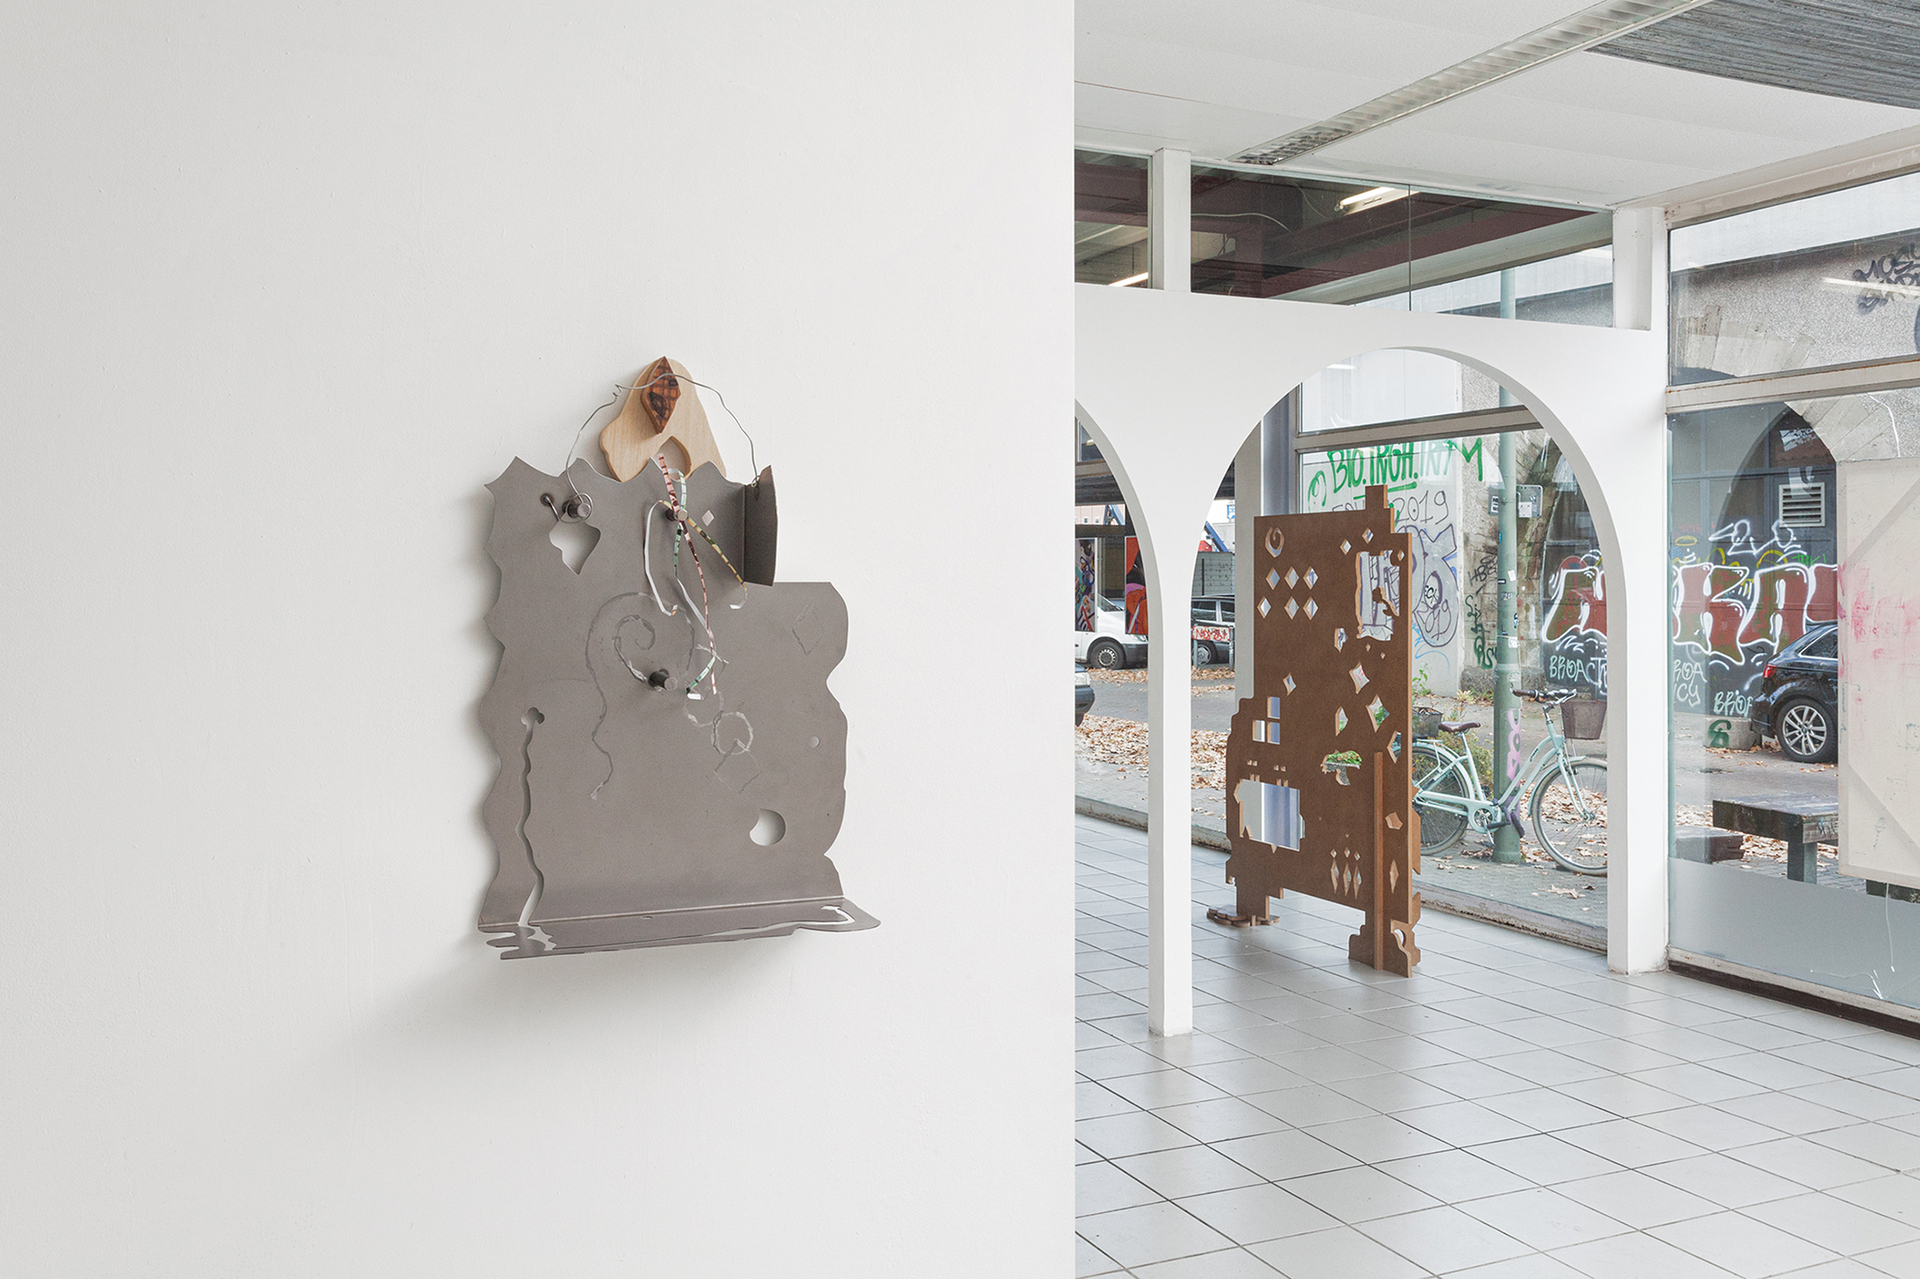 Antonia Nannt, left: What’s in your bag, 2020, steel sheet, paper strips, magnet, MDF, limewood, right: Heartbreak House (symbolism stops at my door), 2020, silkscreen on MDF, magnets, lacquer